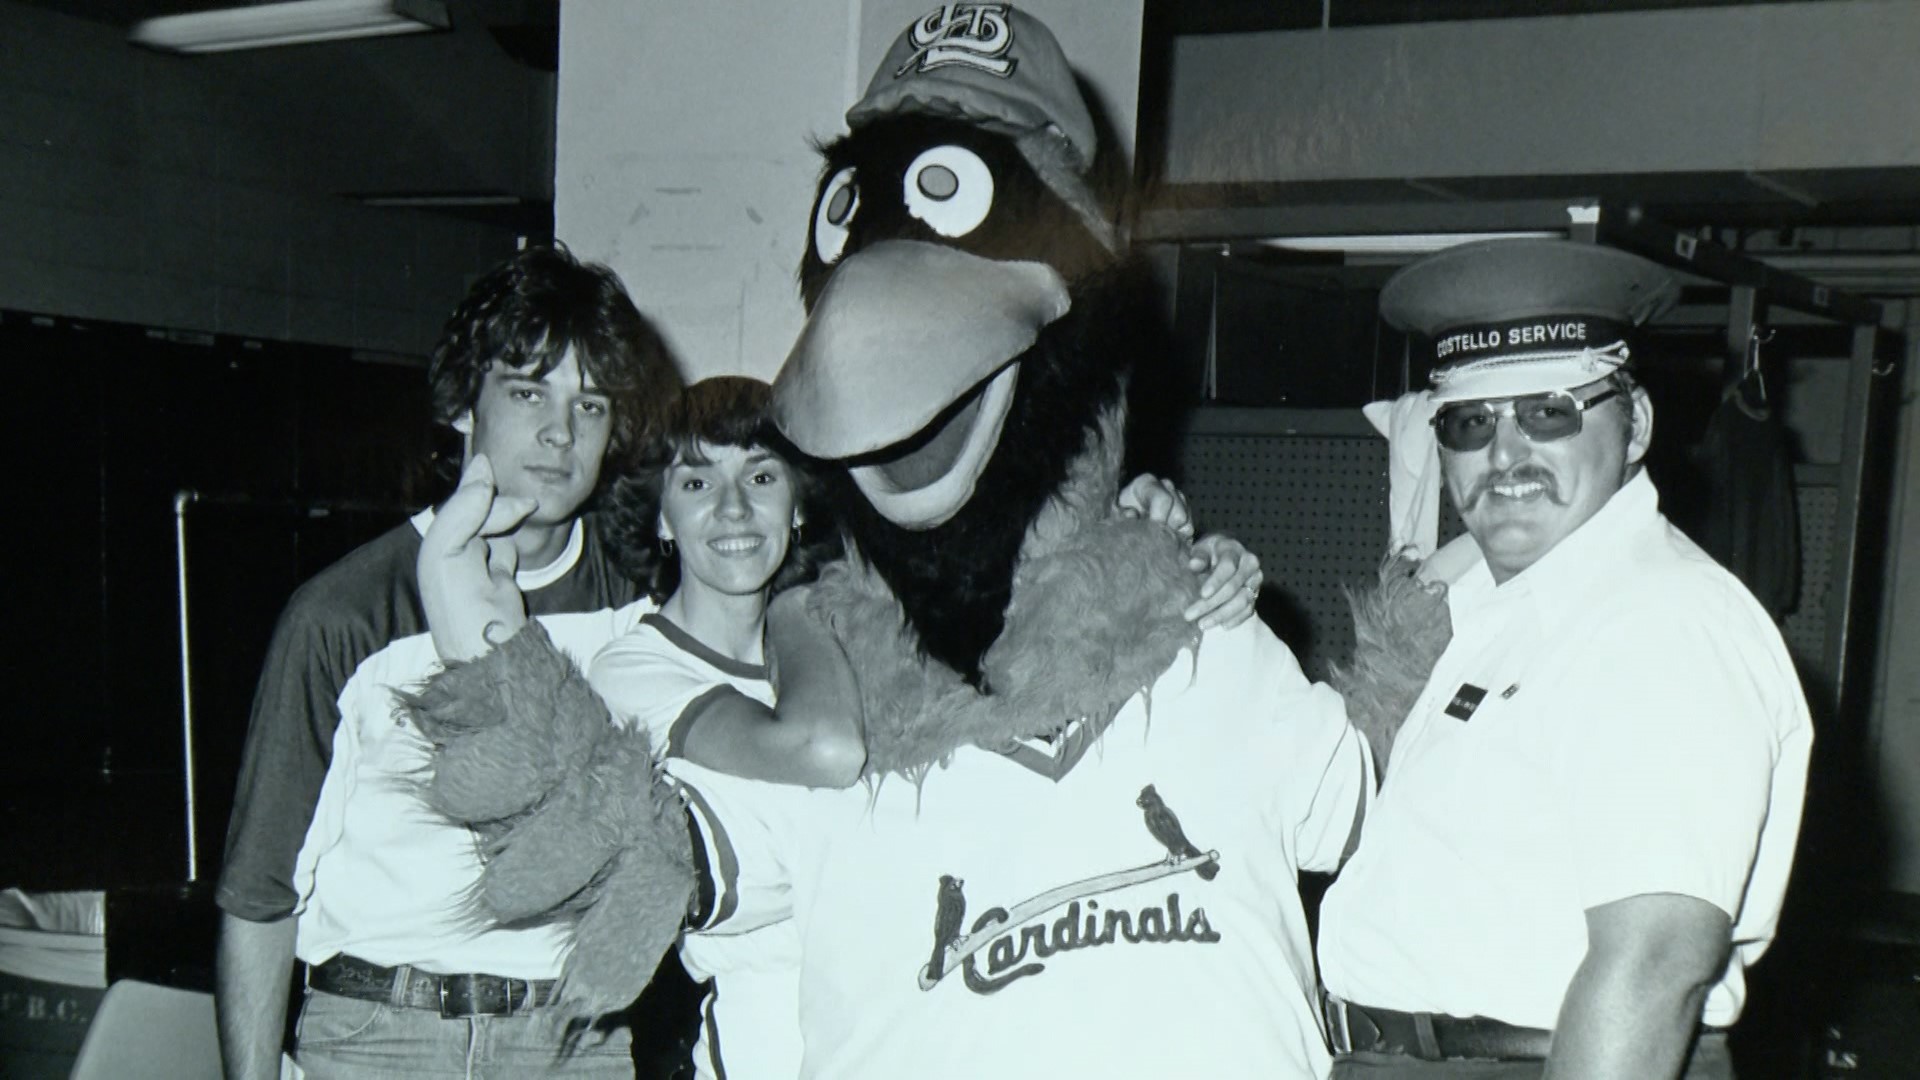 Fredbird is as central to the St. Louis Cardinals opening day as any player, and one of the first people to bring the bird to life has some stories to tell.